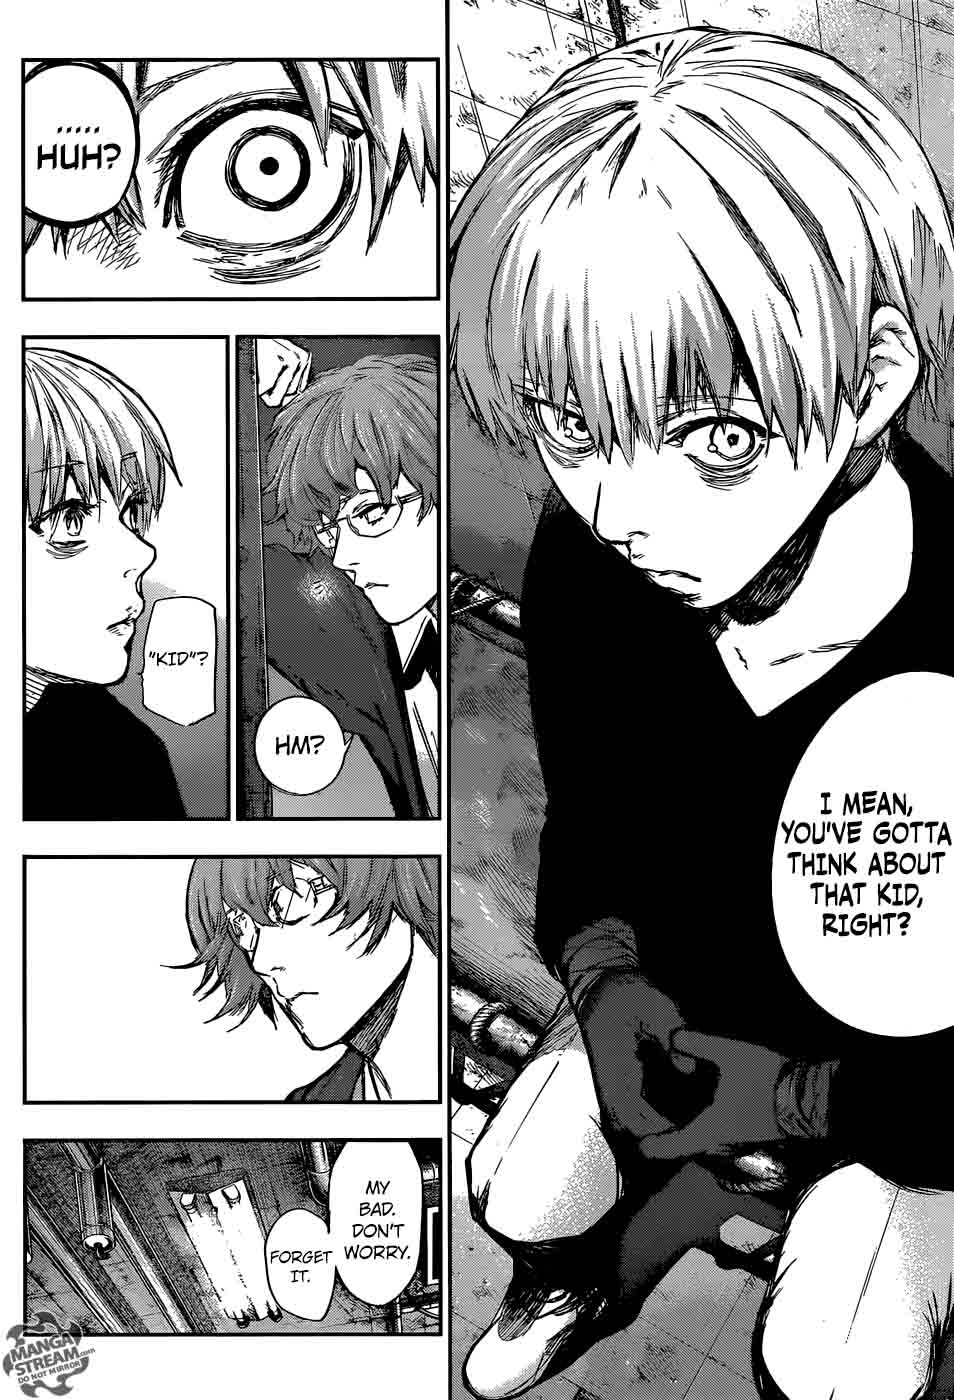 Tokyo Ghoul:re, Chapter 130 - Meaningless - Tokyo Ghoul Manga Online